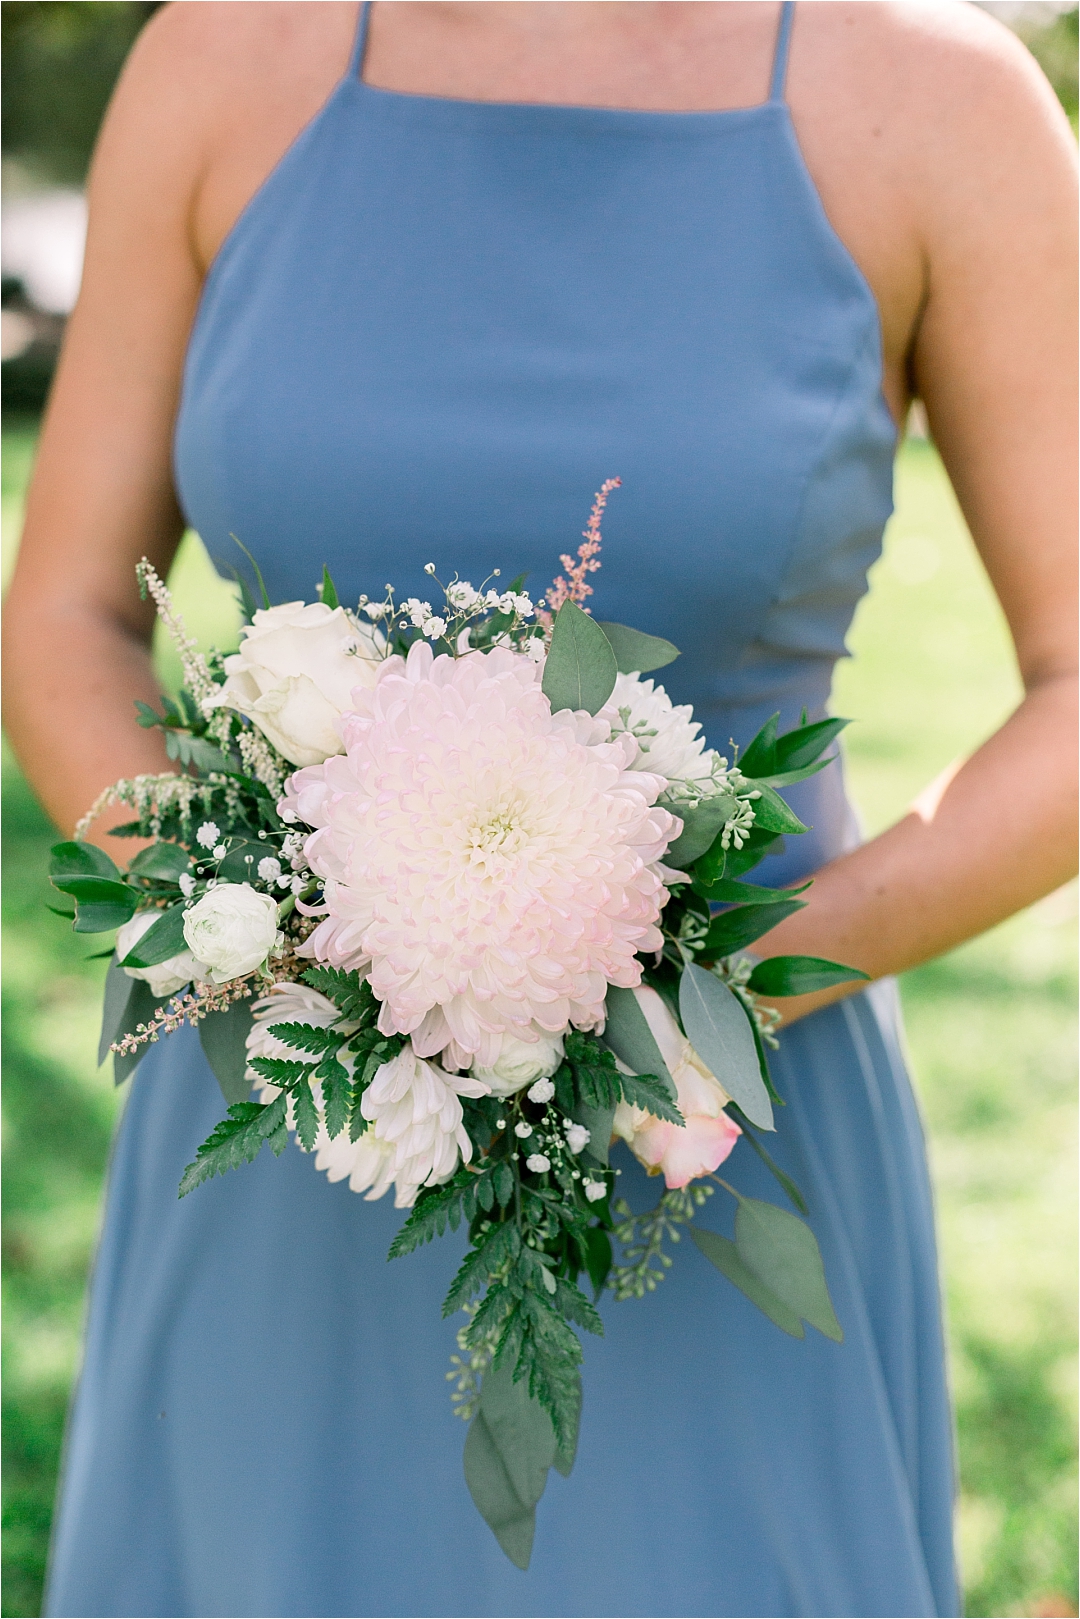 light blue bridesmaid dress with summer floral_Photos by Leigh Wolfe, Atlanta's Top Wedding Photographer